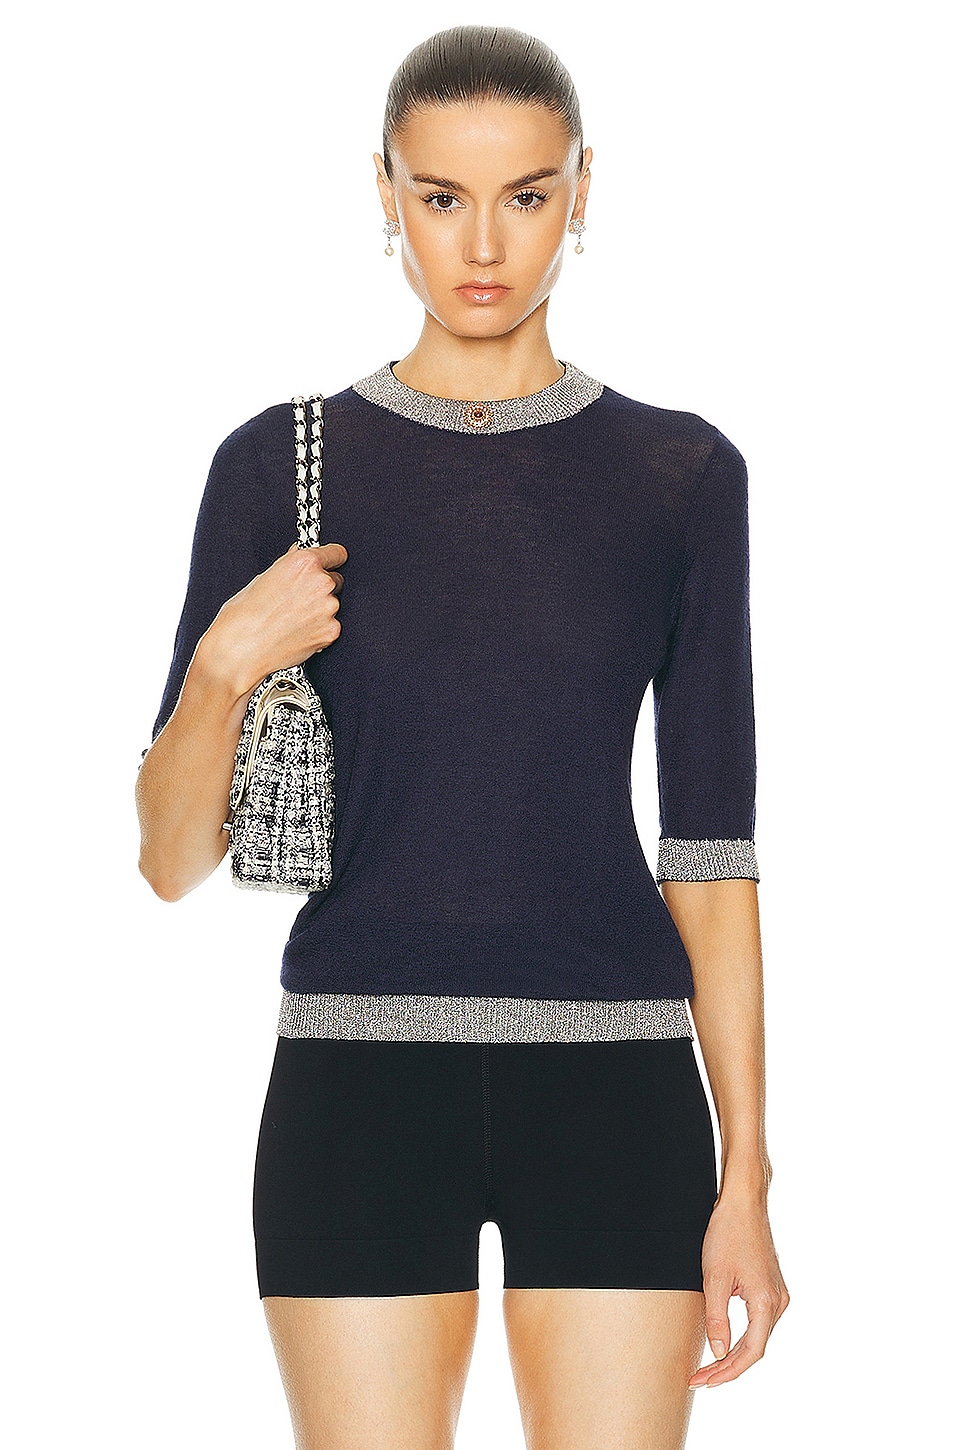 Image 1 of FWRD Renew Chanel Cashmere Knit Top in Navy